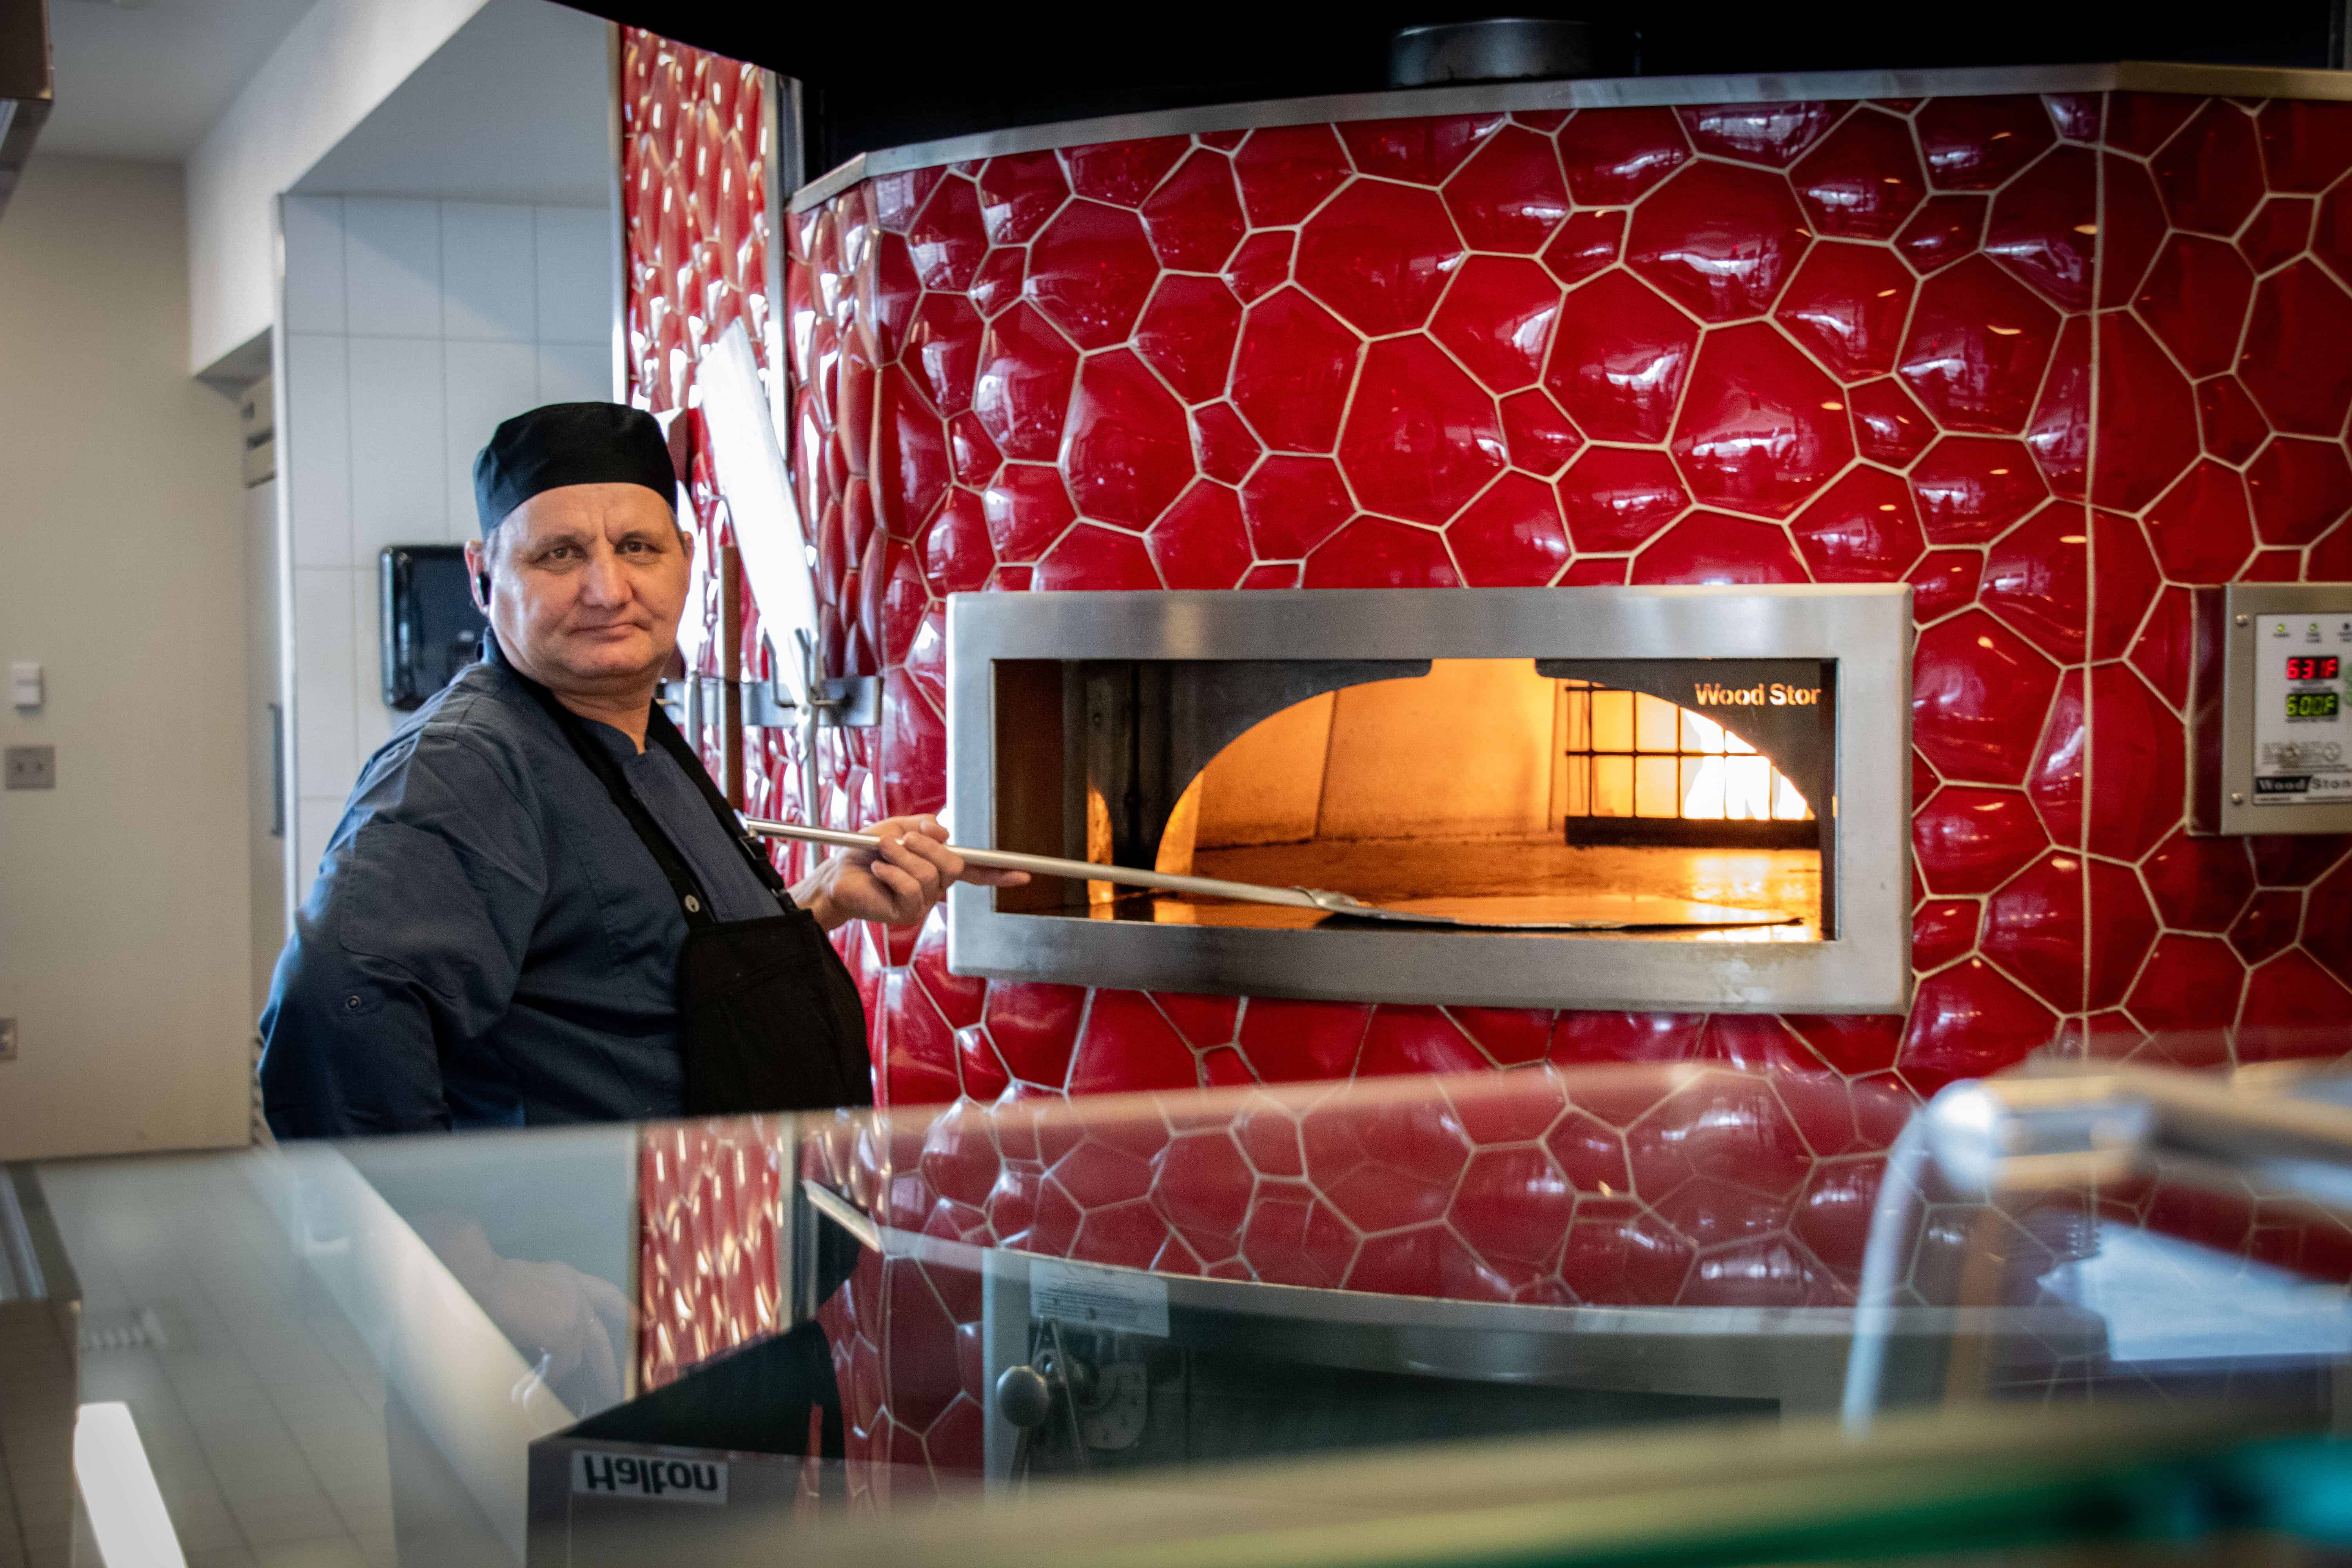 A man standing at a pizza oven.